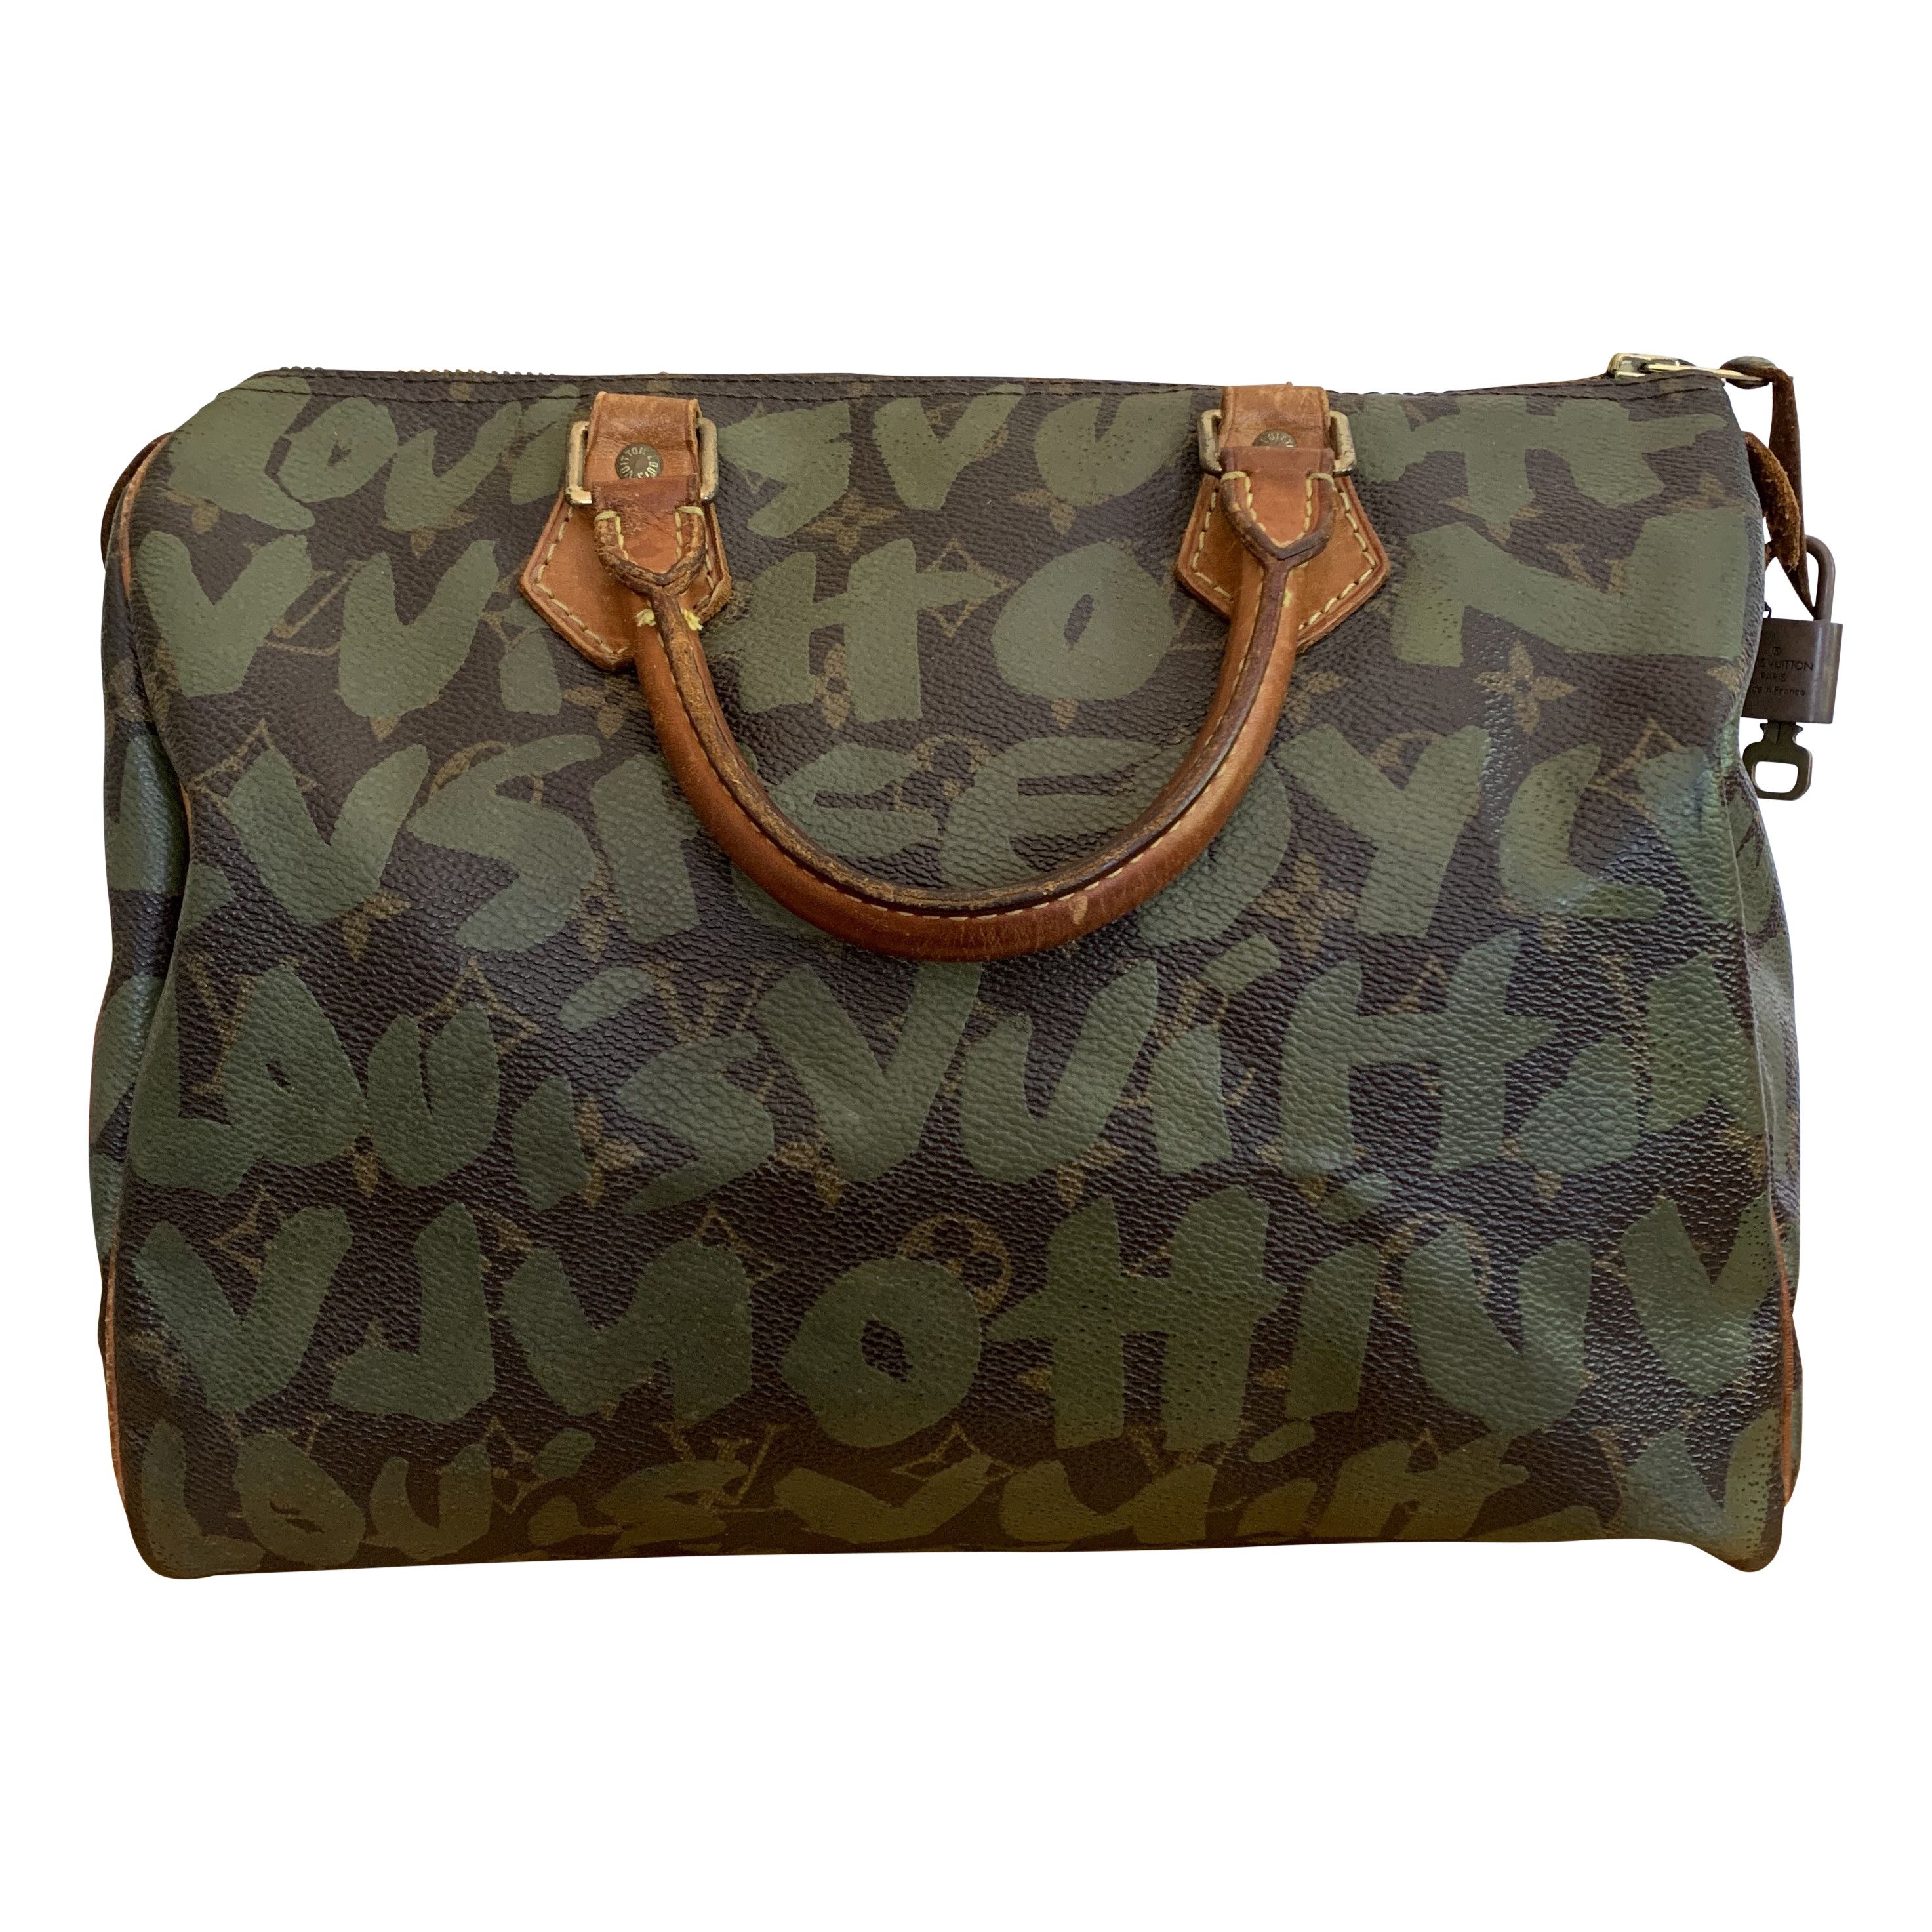 Louis Vuitton Green Graffiti Stephen Sprouse Limited Edition Zippy